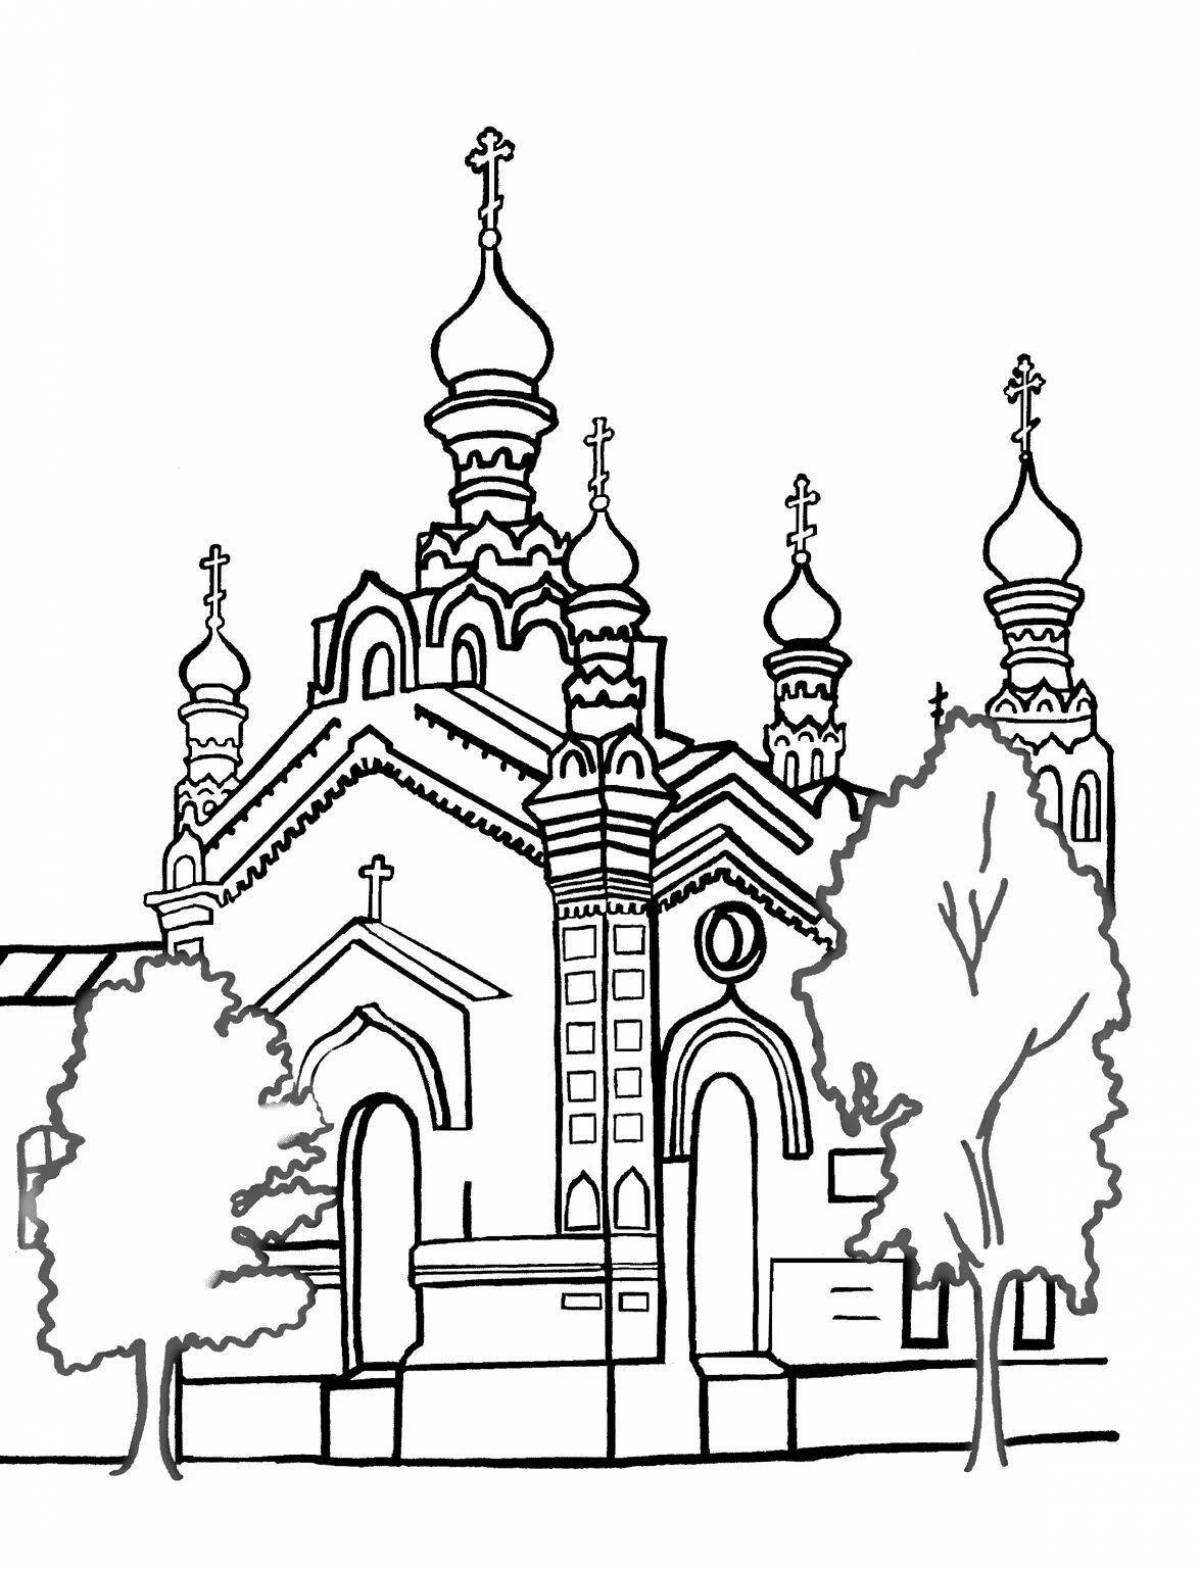 Coloring page charming chapel